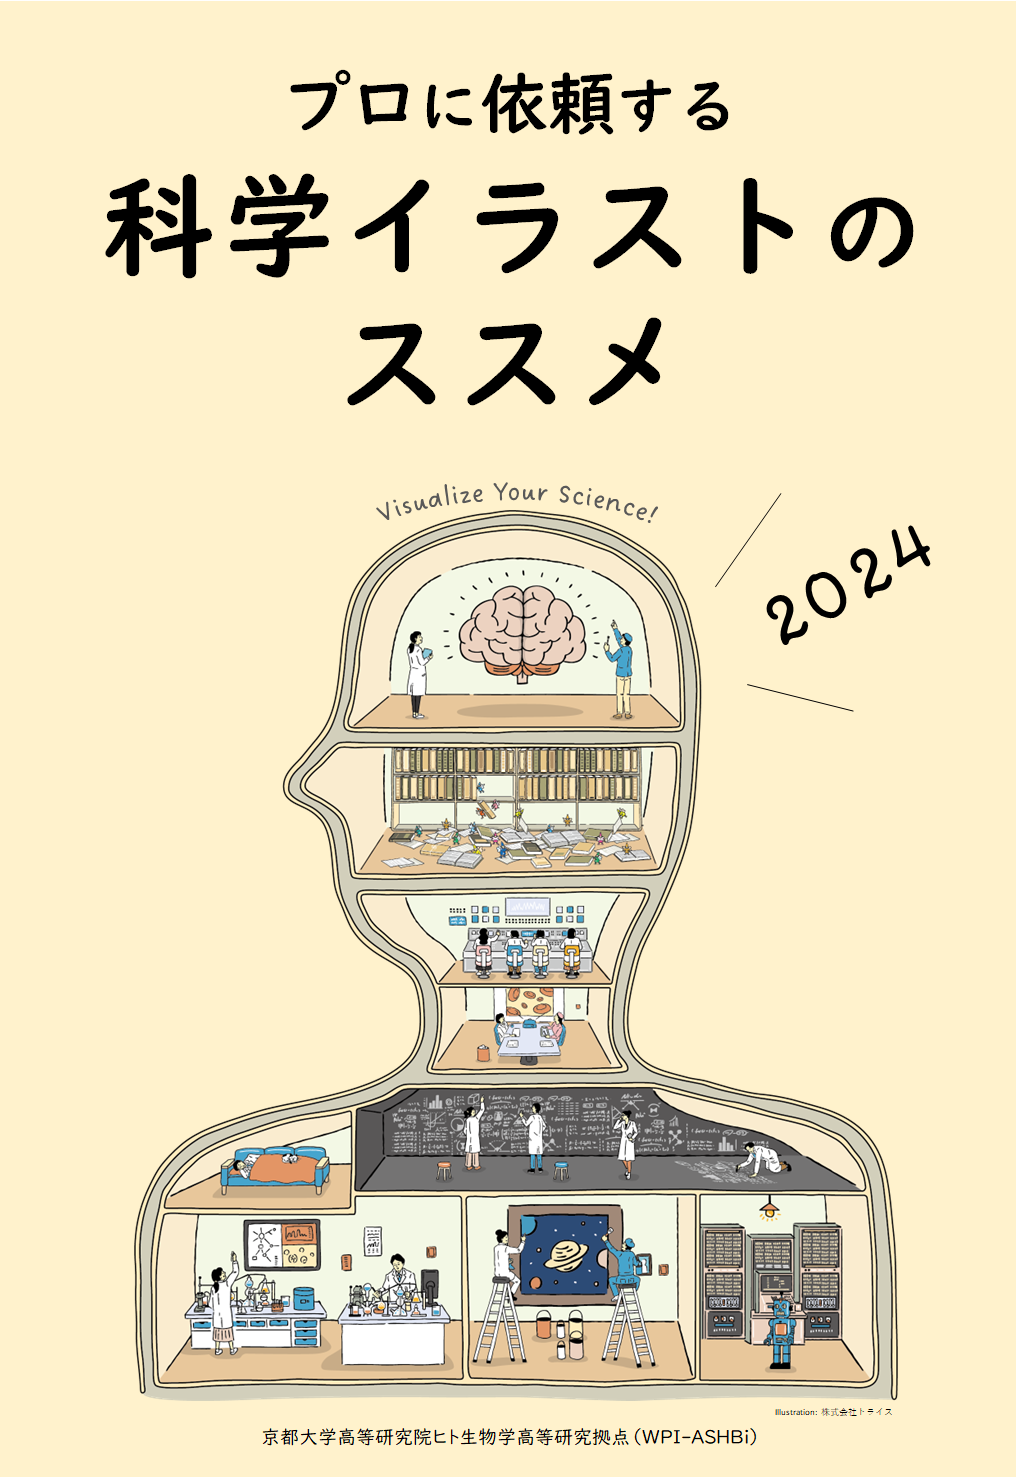 Booklet “Visualize Your Science” (Japanese ver.) has been published